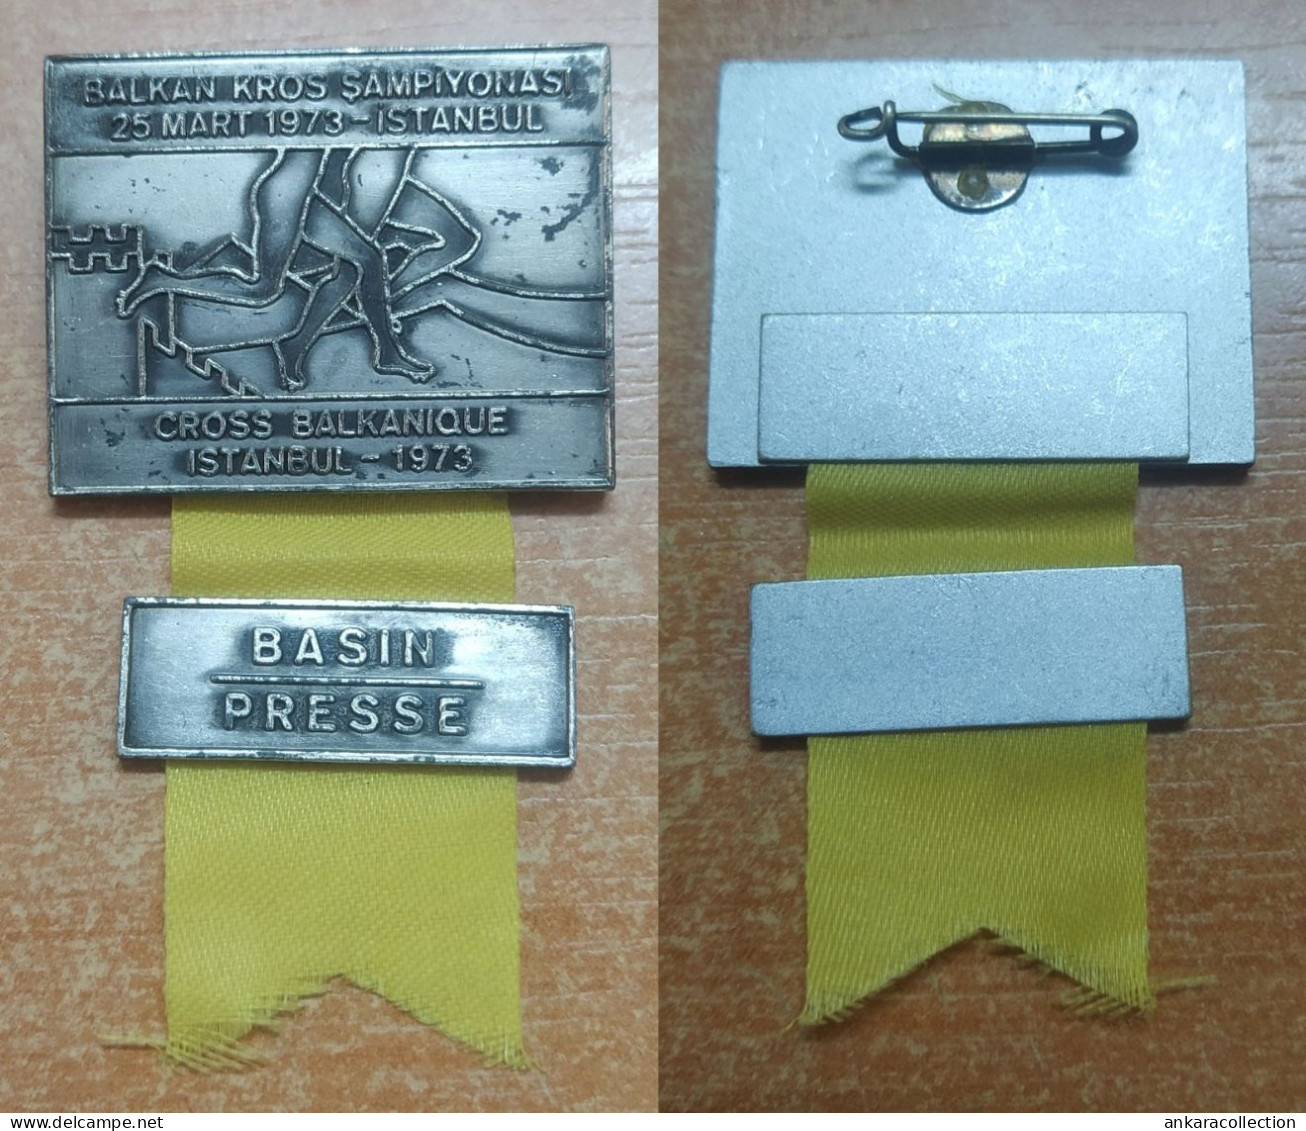 AC -  BALKAN CROSS COUNTRY CHAMPIONSHIPS 25 MARCH 1973 ISTANBUL PRESS BADGE PIN - Kleding, Souvenirs & Andere